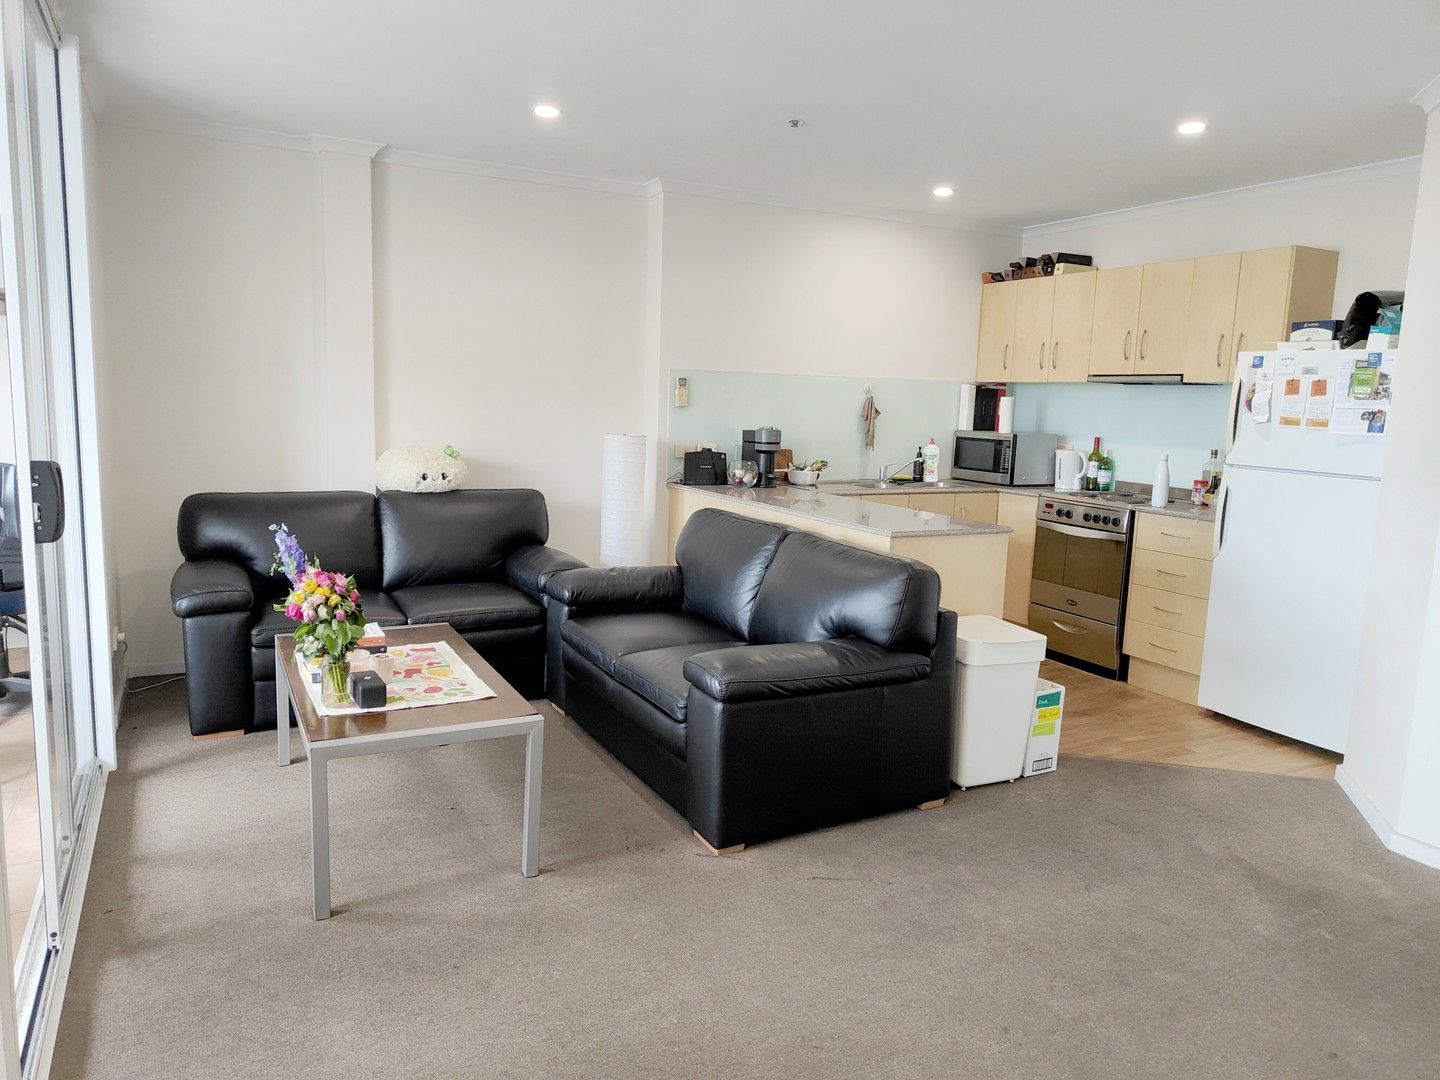 2 bedrooms Apartment / Unit / Flat in 121/65 King William Street ADELAIDE SA, 5000